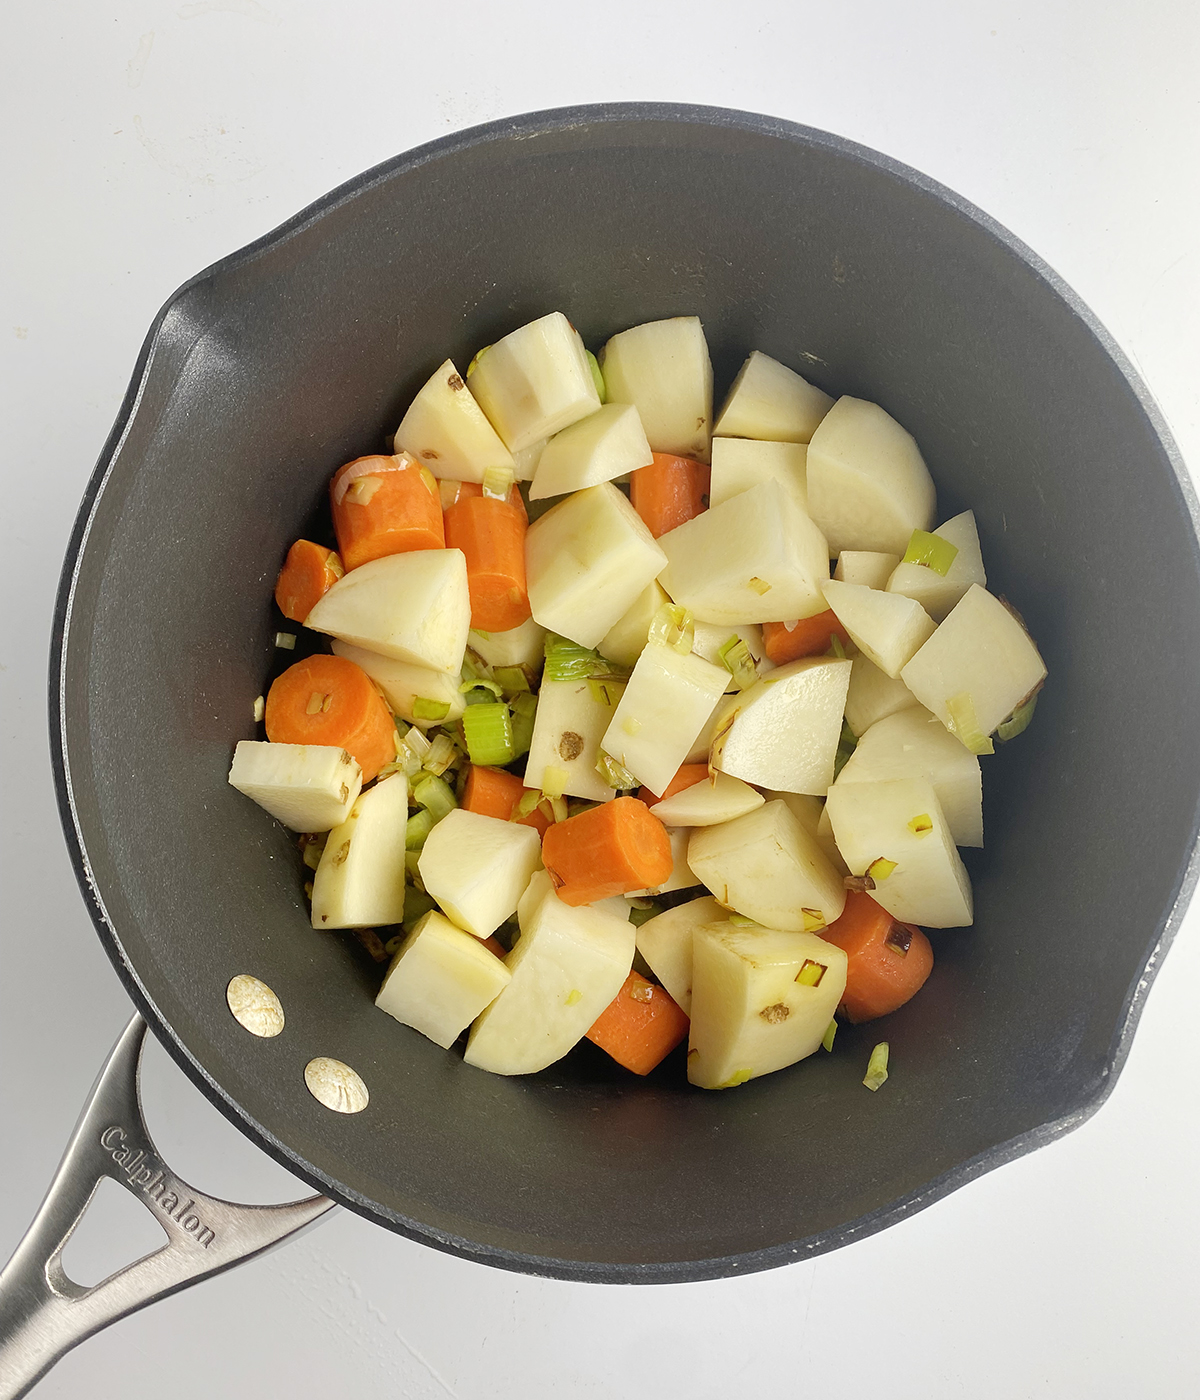 Chopped vegetables for winter vegetable soup in a pot.